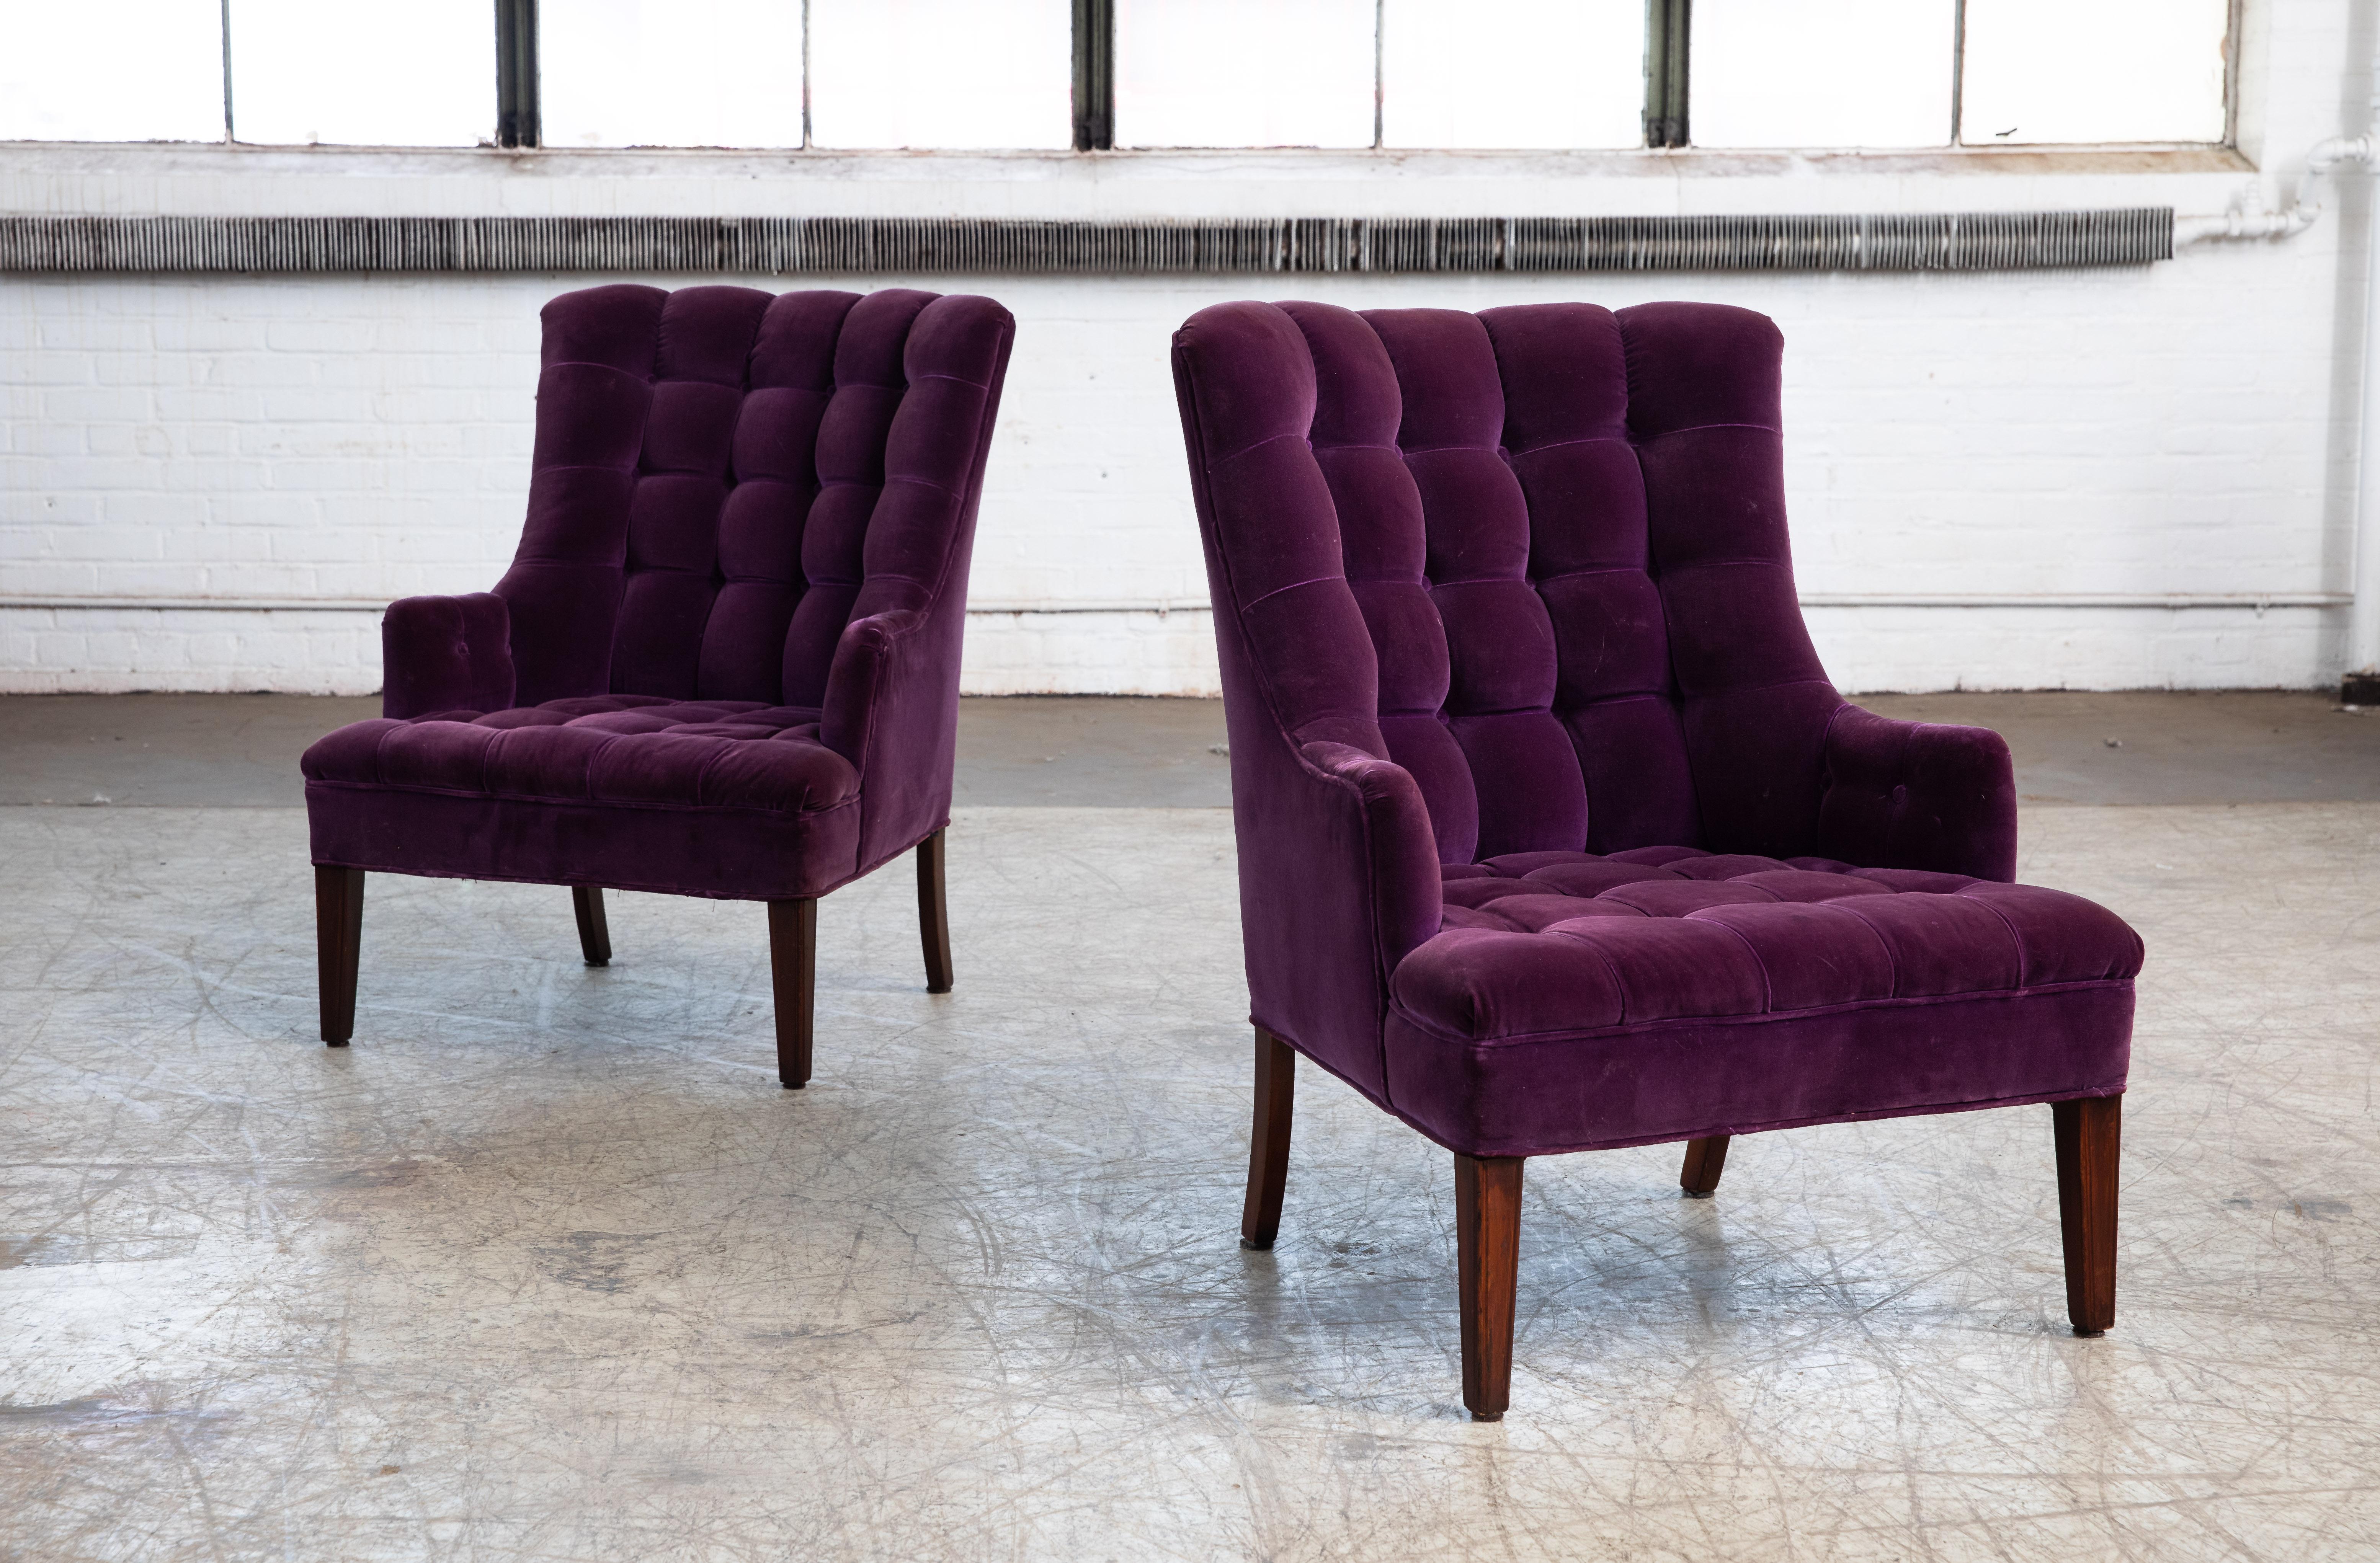 Very charming pair of slipper chairs in traditional midcentury Scandinavian style. Upholstered at a later point in a purple velvet that remains in very good condition. Relatively light and versatile with a good presence about them. Comfortable,